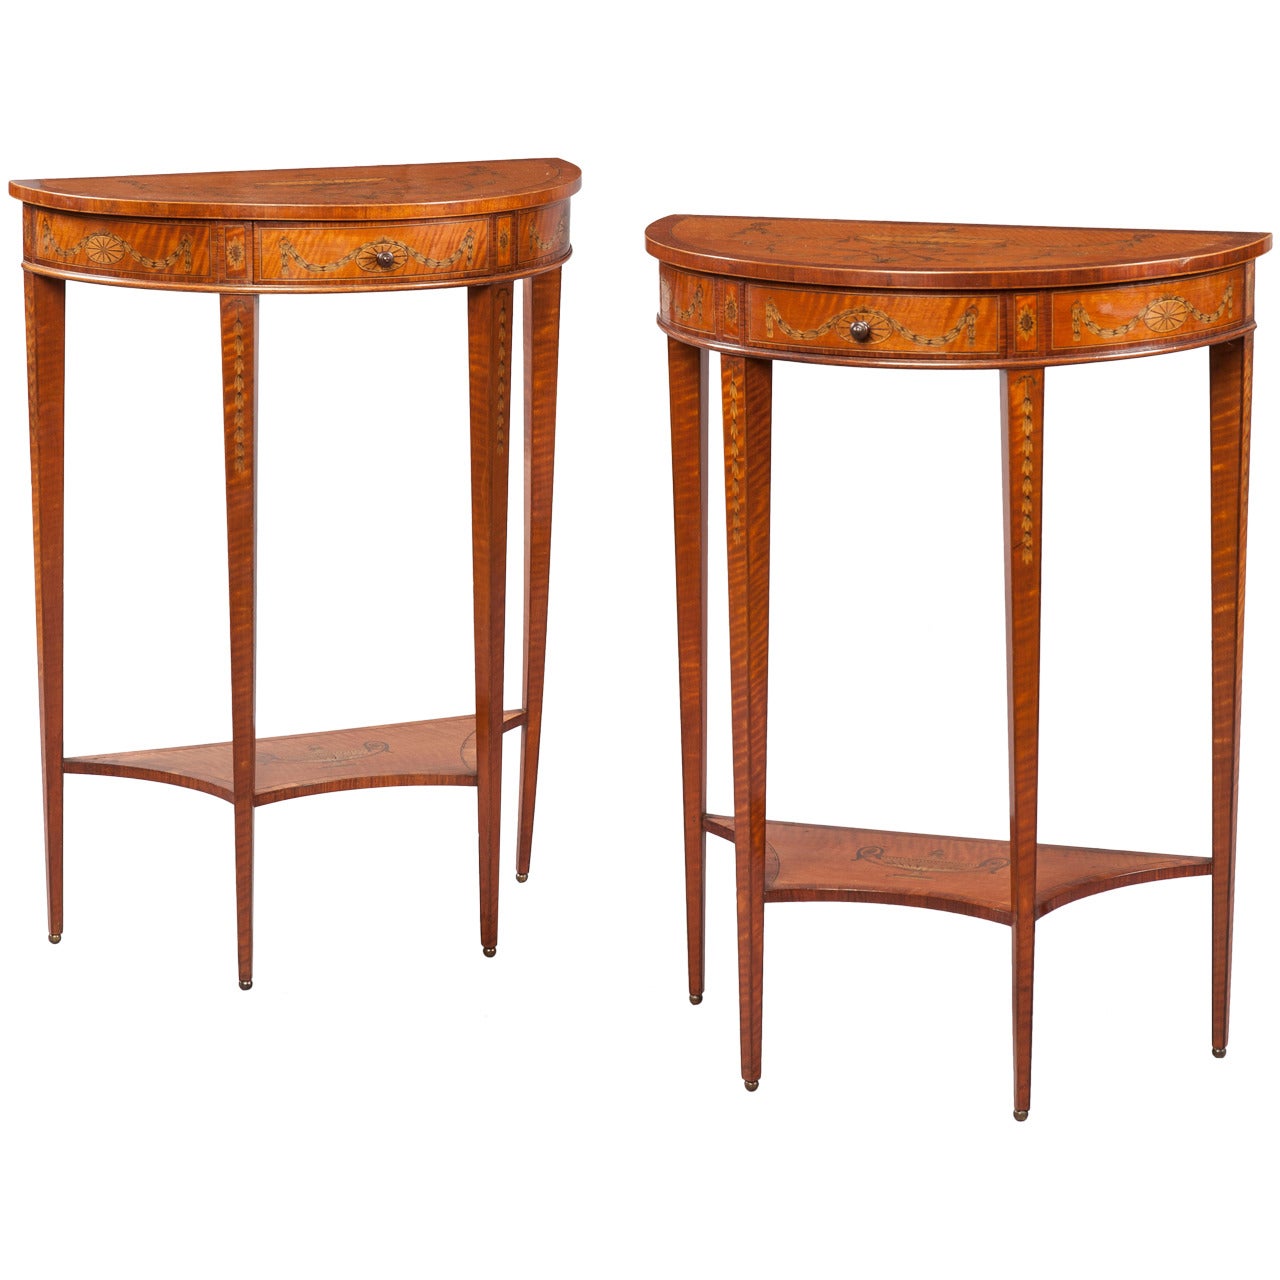 Pair of English Satinwood Console Tables in the Neoclassical Style For Sale